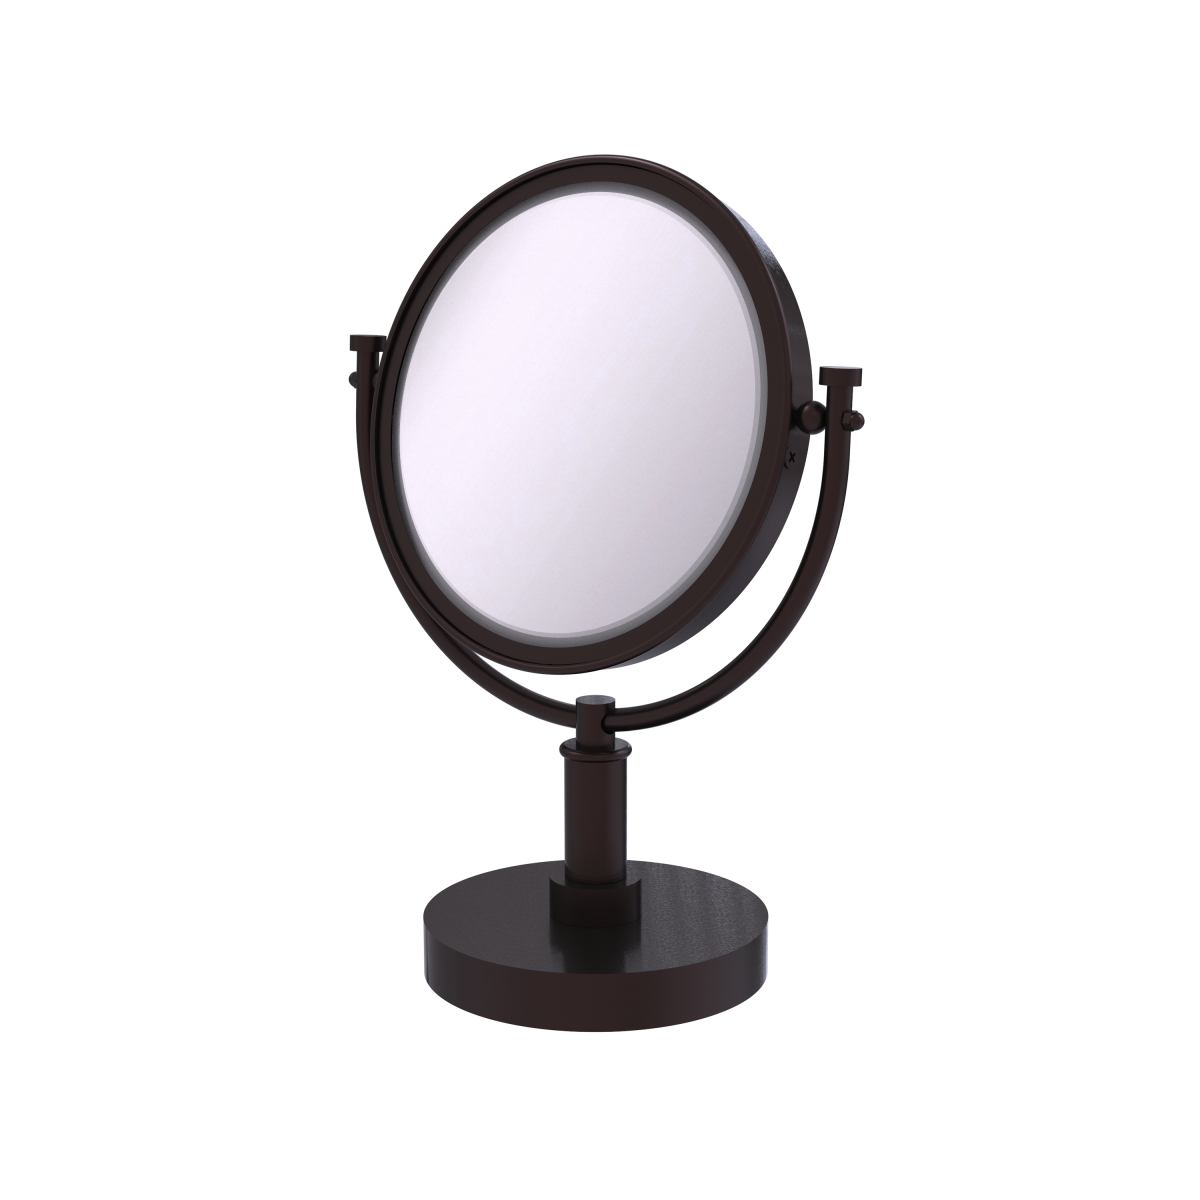 Dm-4-2x-abz Smooth Ring Style 8 In. Vanity Top Make-up Mirror 2x Magnification, Antique Bronze